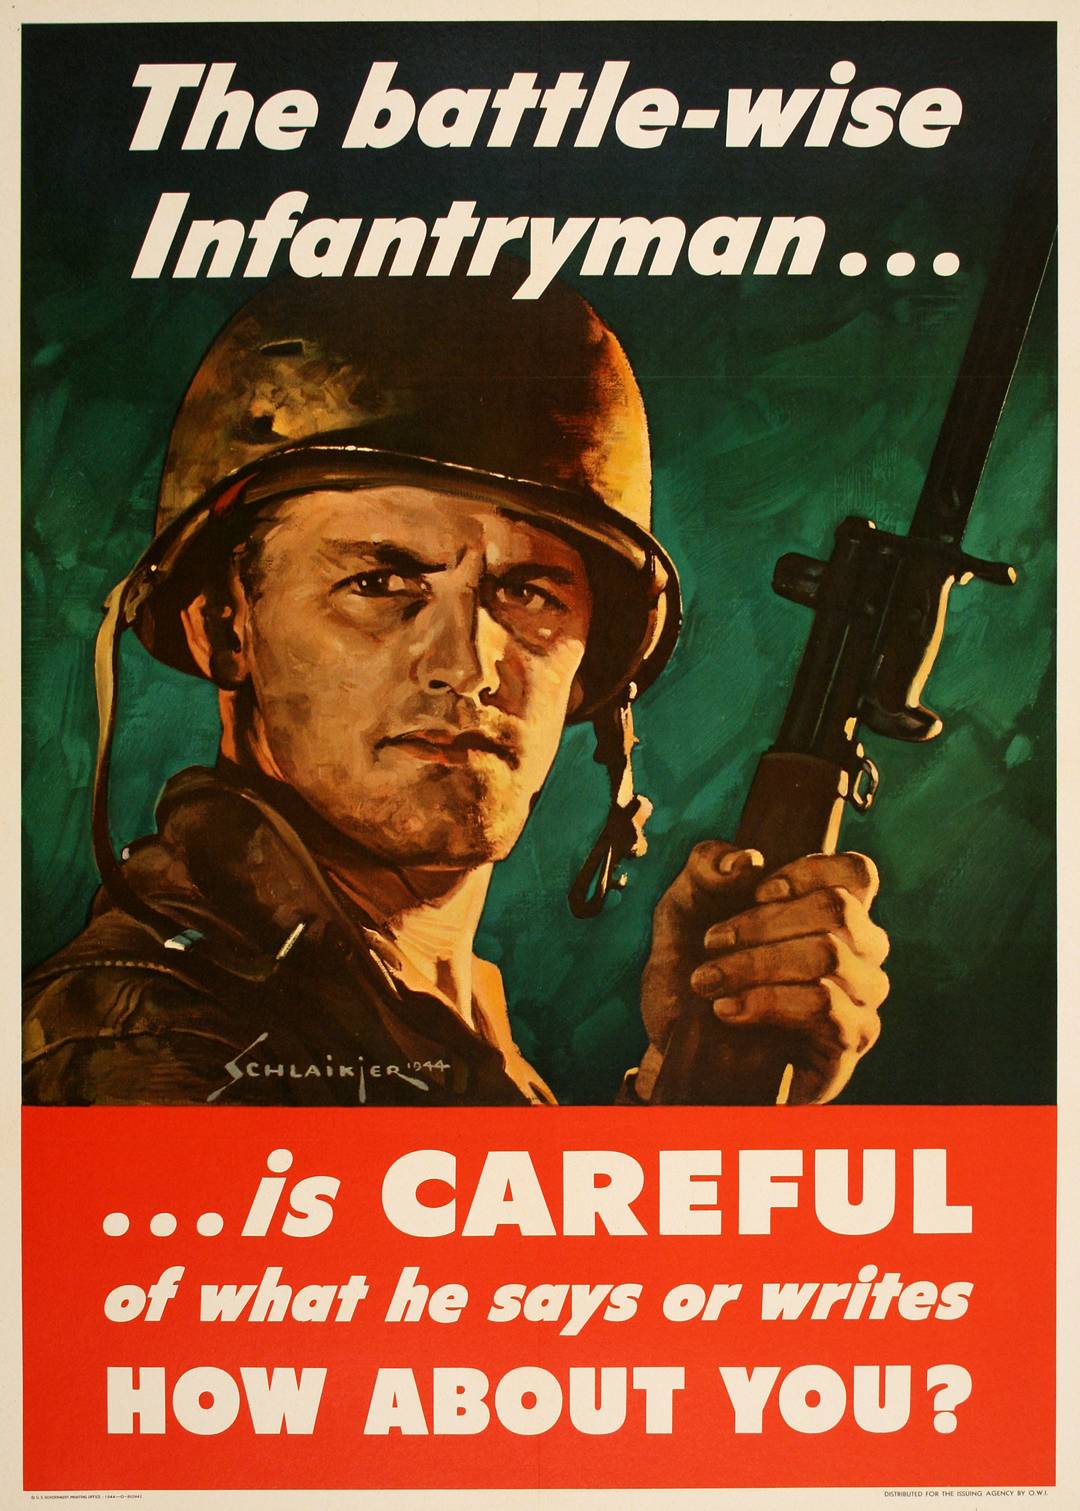 Original American WWII 1944 Poster by Schlaikjer - The Battle Wise Infantryman